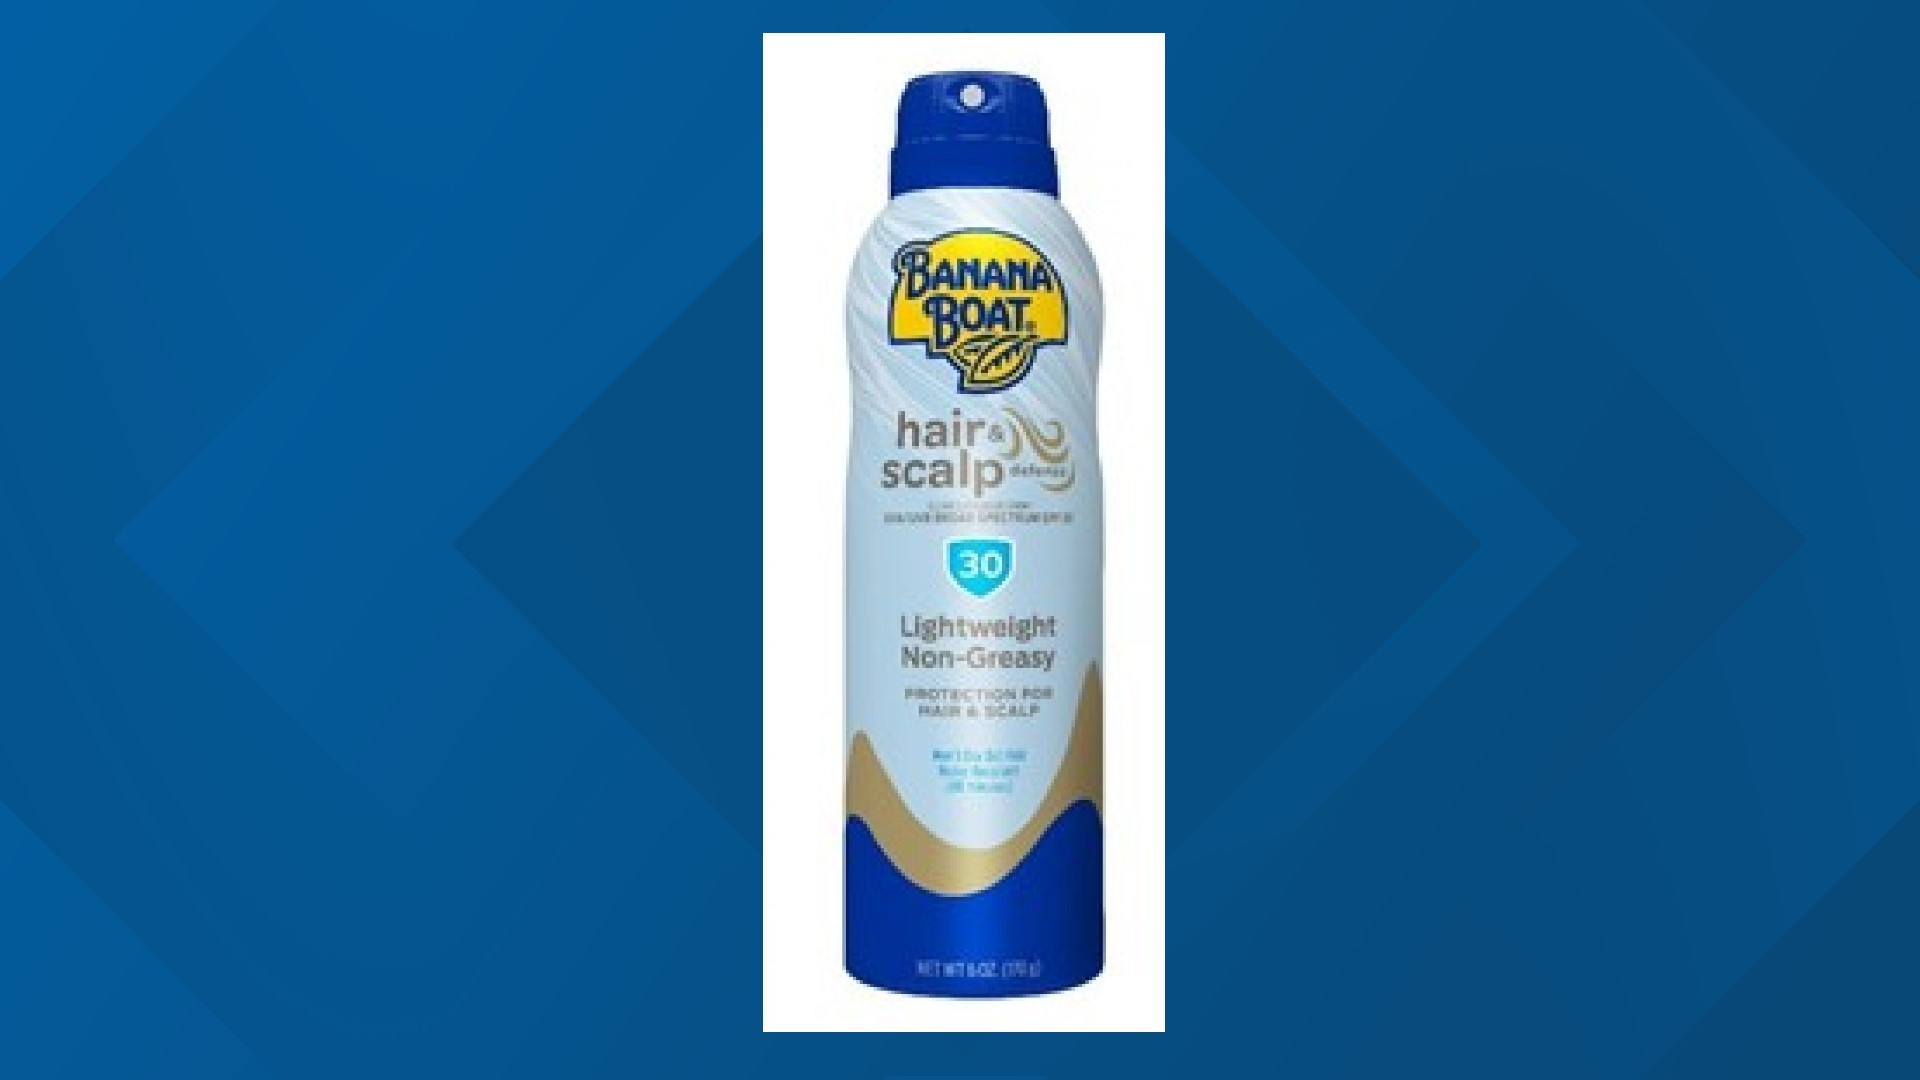 An internal review found trace levels of benzene in the brand's Hair & Scalp Sunscreen Spray SPF 30.